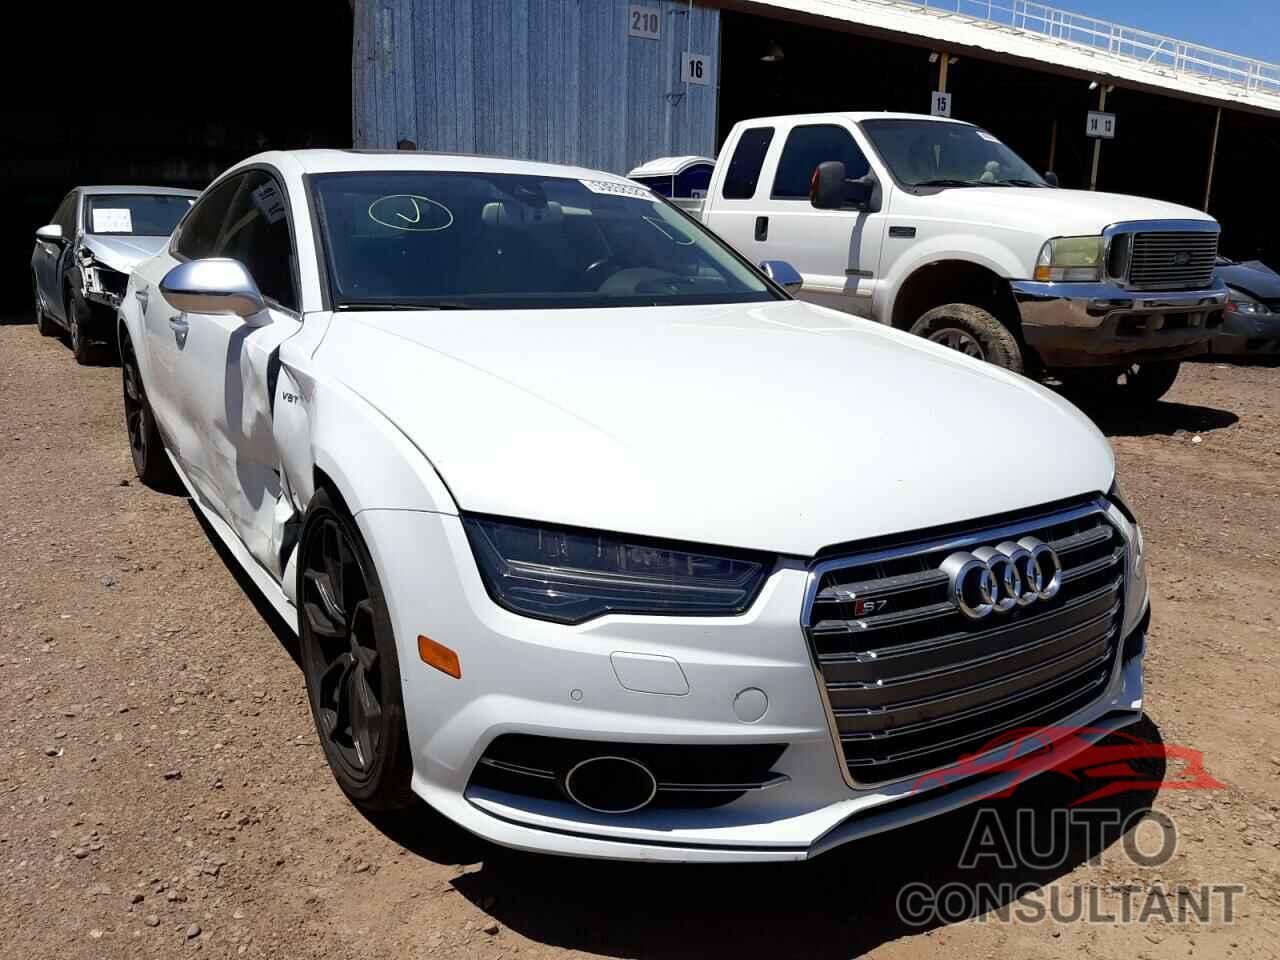 AUDI S7/RS7 2016 - WAUW2AFC0GN084973